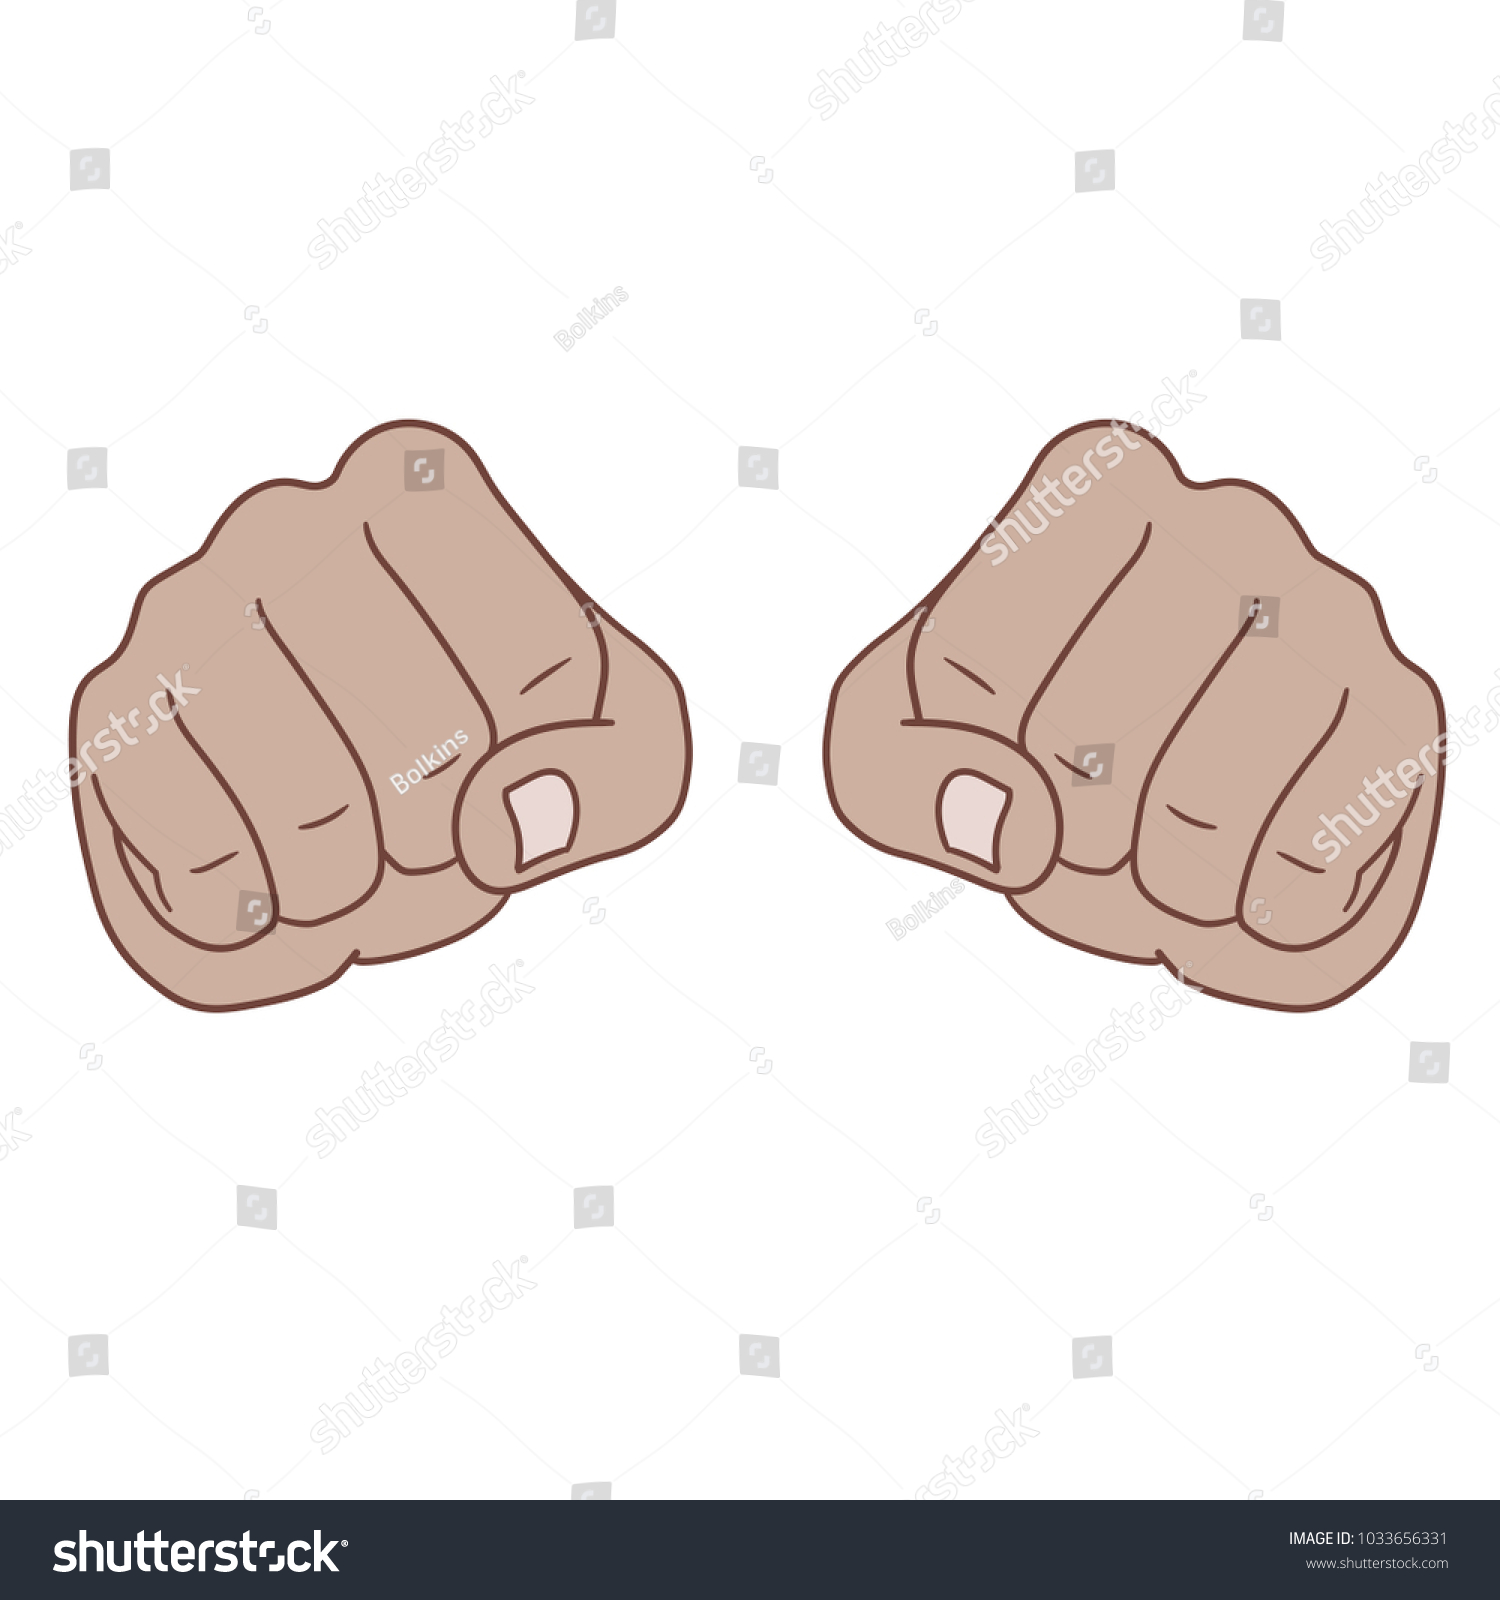 This Two Fists Front View Stock Vector 1033656331 - Shutterstock